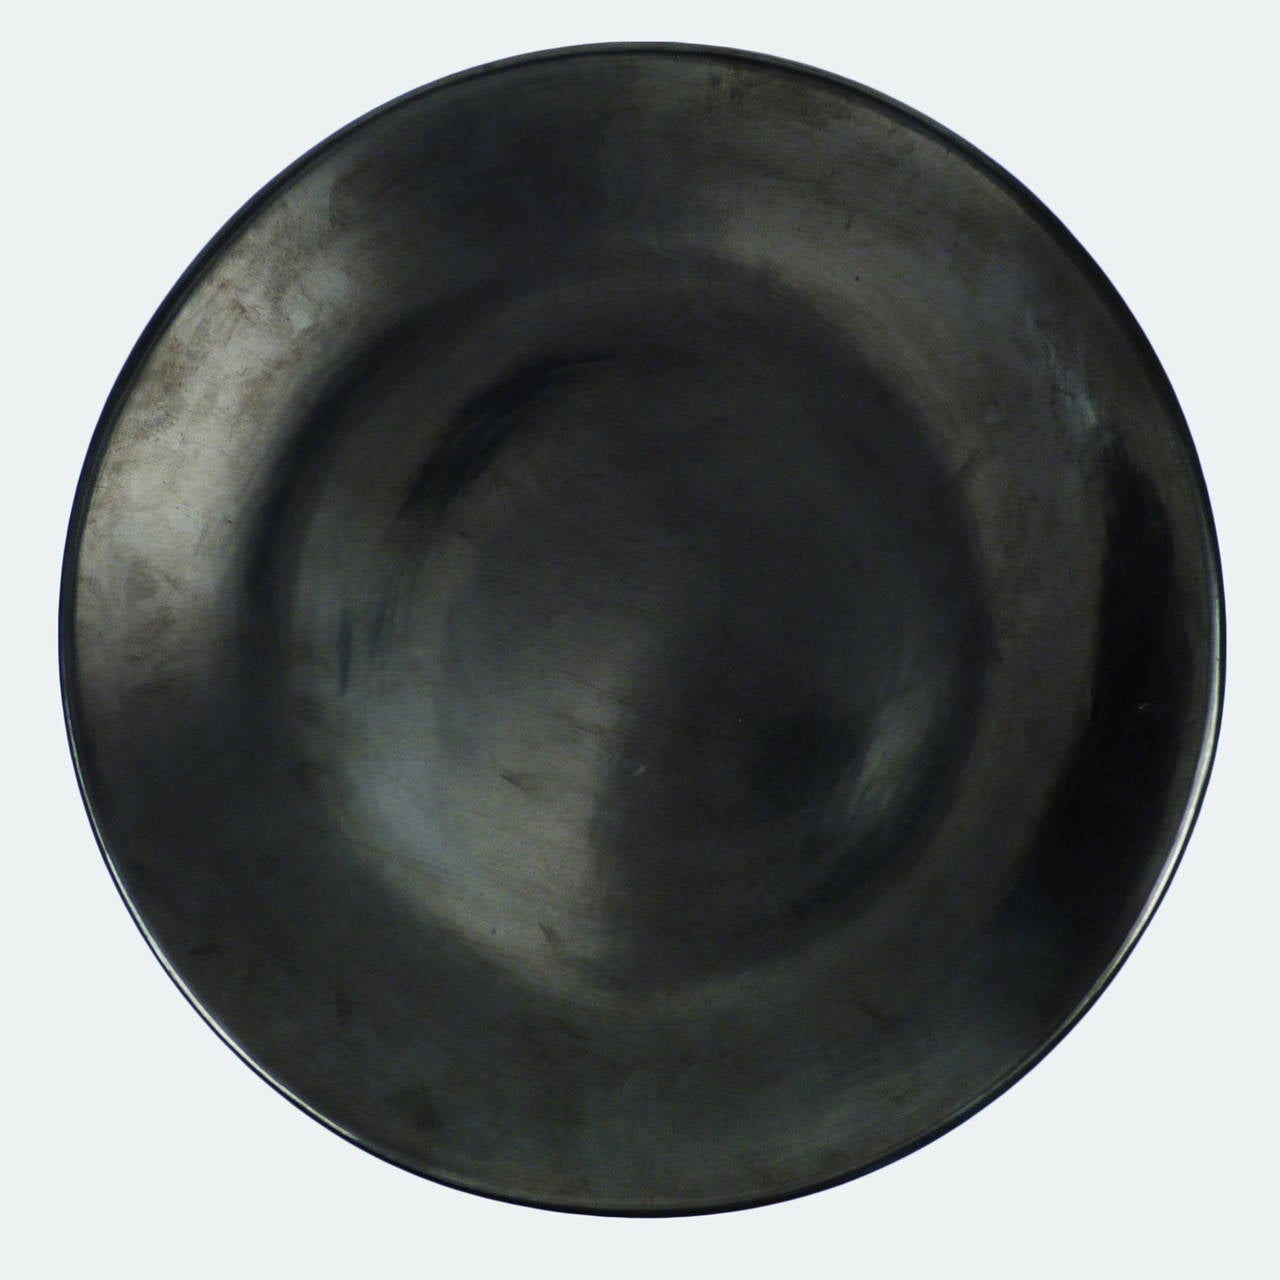 This polished black plate is a masterpiece by mother and son potters, Maria Martinez and Popovi Da of San Ildefonso Pueblo. Maria/Popovi is one of the most sought after signatures in Pueblo pottery. The plate most likely dates from the mid 1950's.